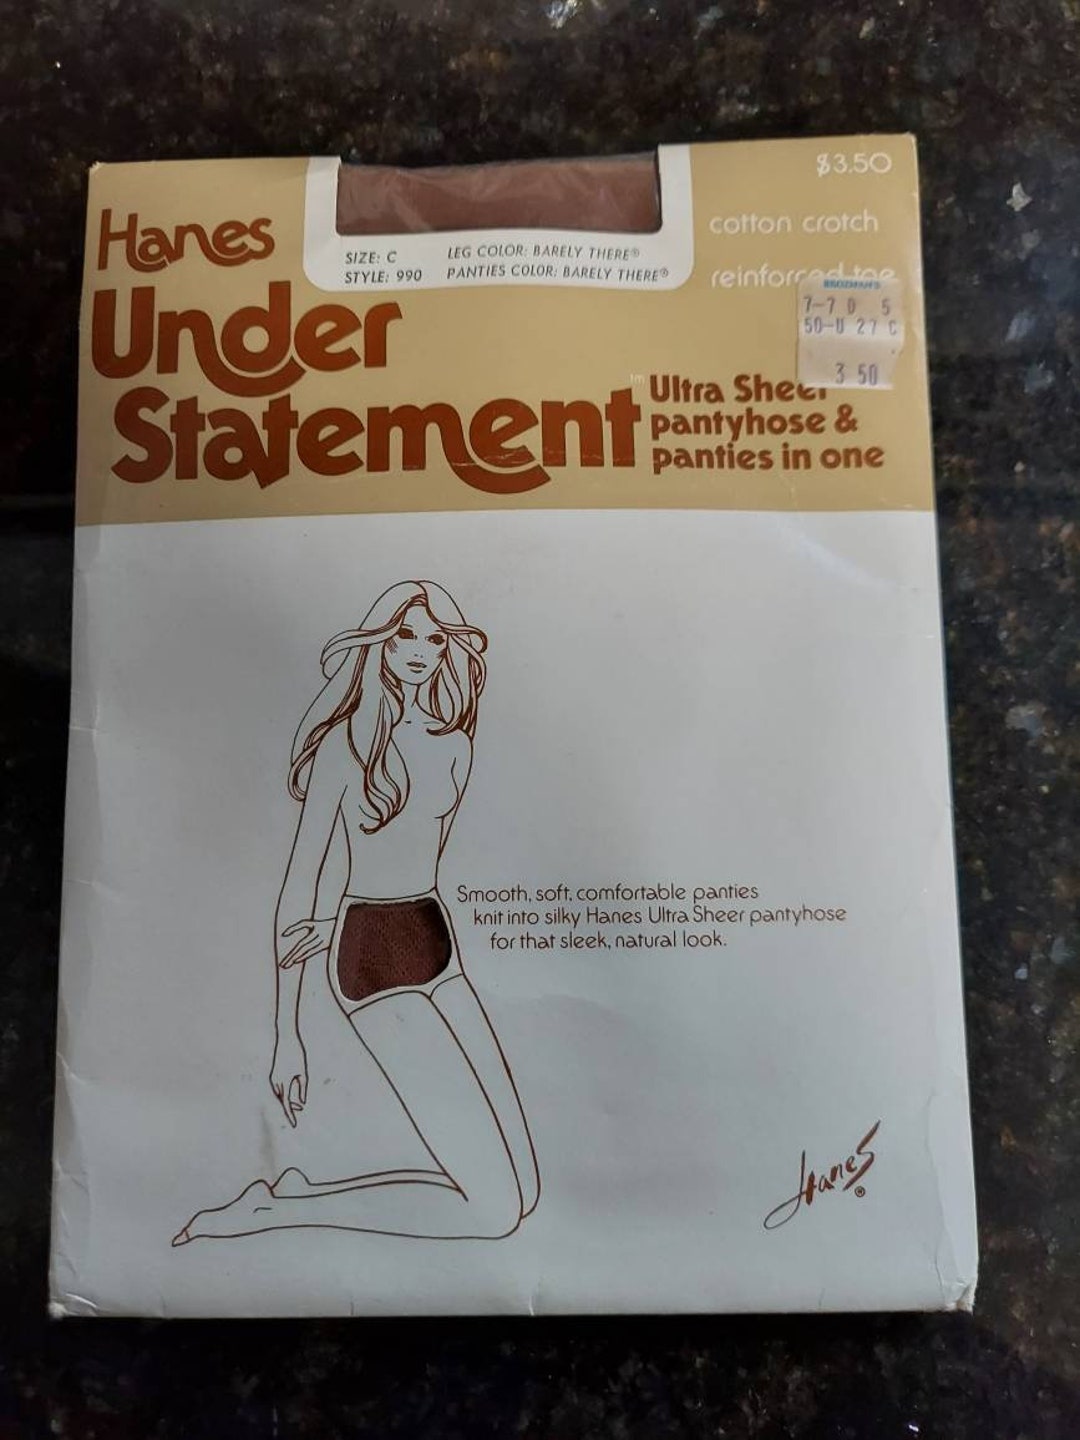 Vintage Hanes Under Statement 1 Pair Ultra Sheer Pantyhose and Panties in  One Size C Color Barely There 